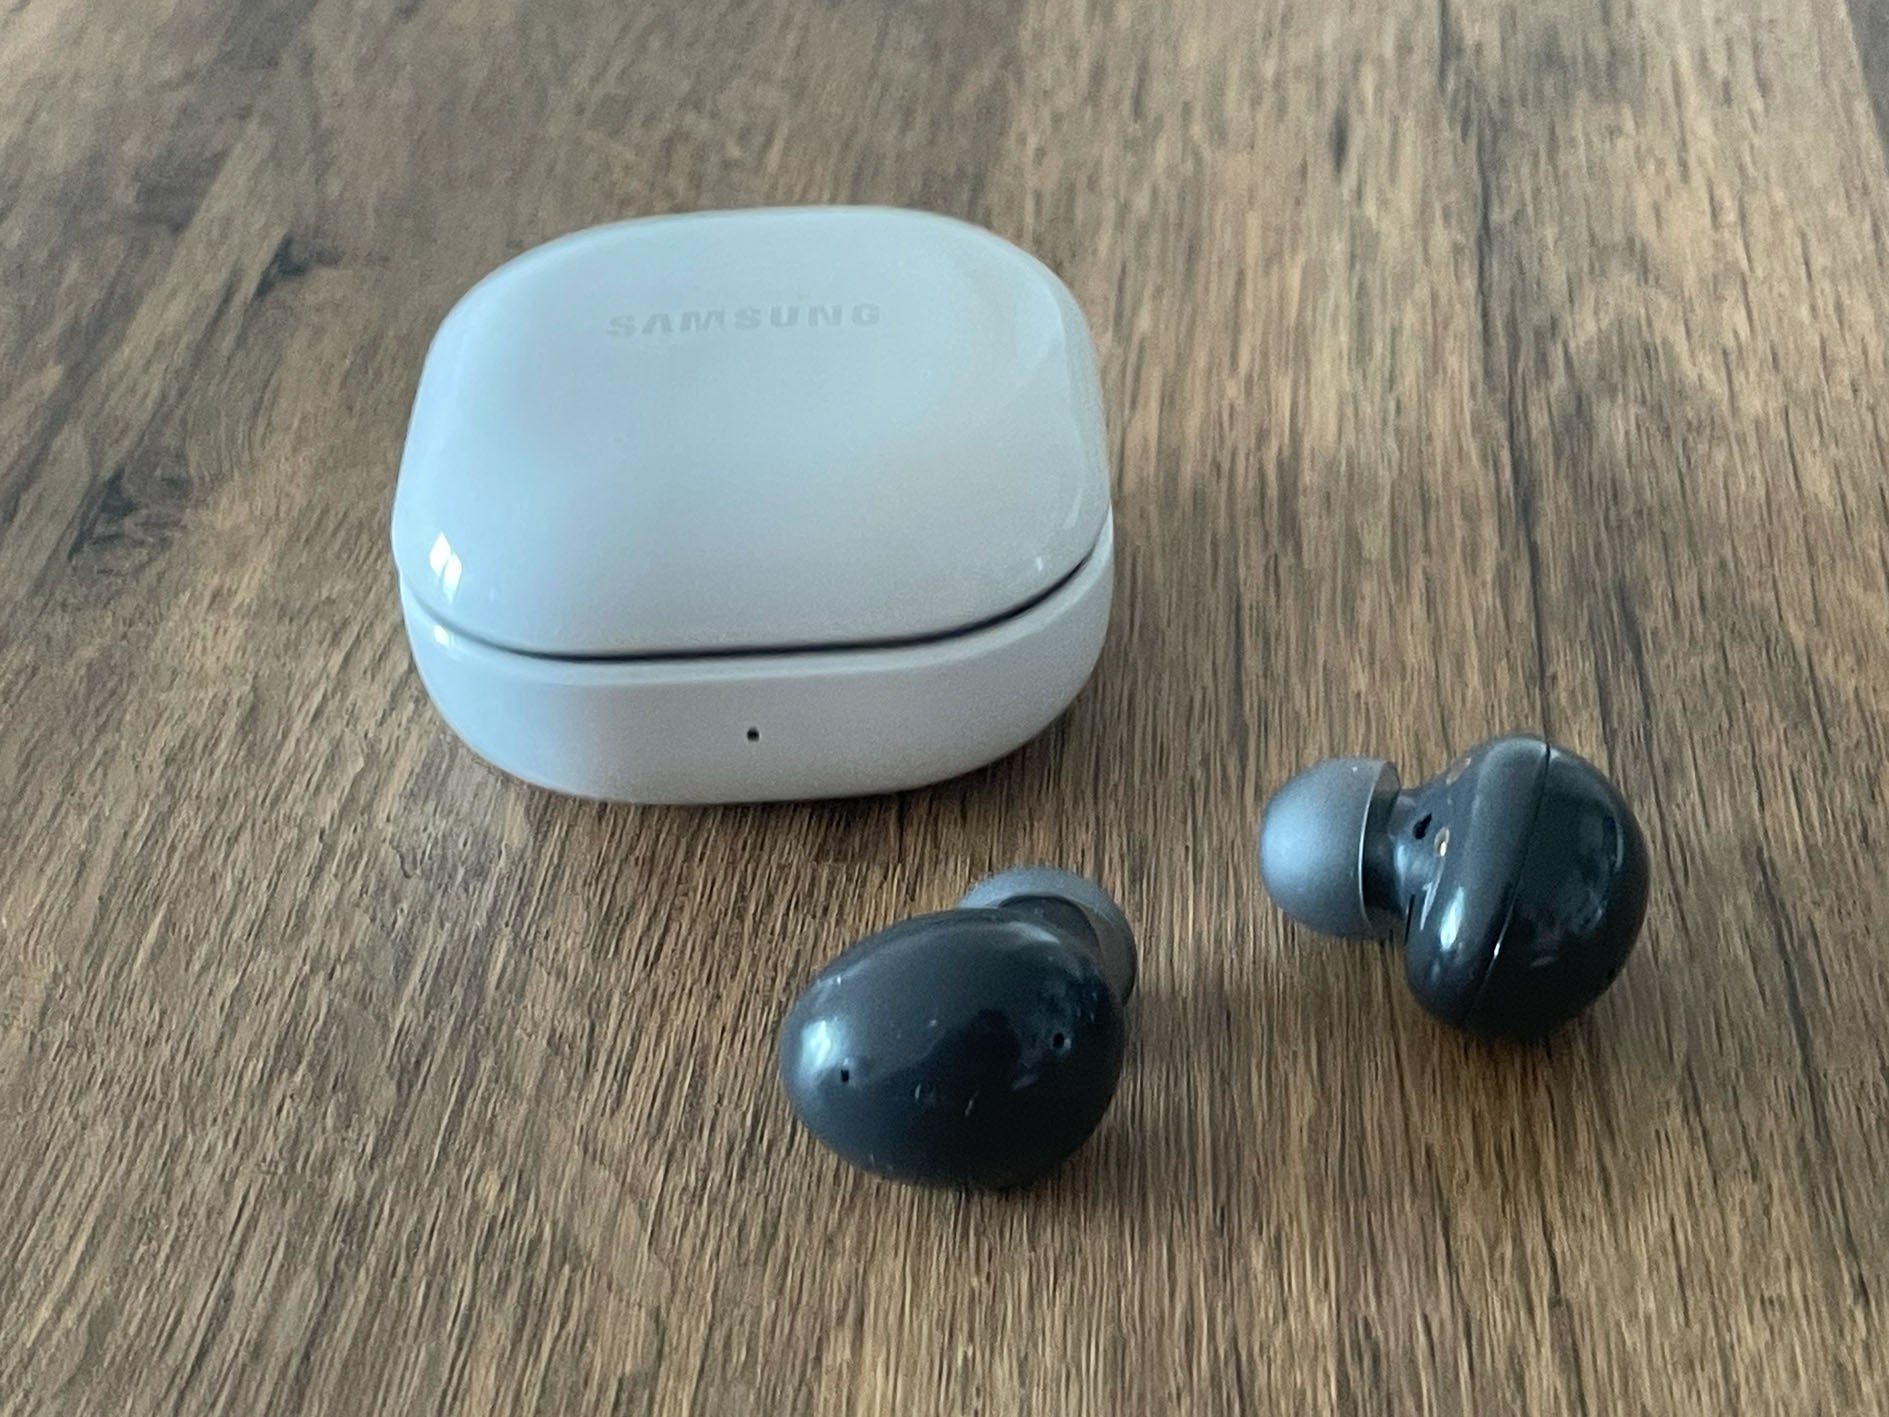 Samsung Galaxy buds 2 review: Premium features, poor battery life